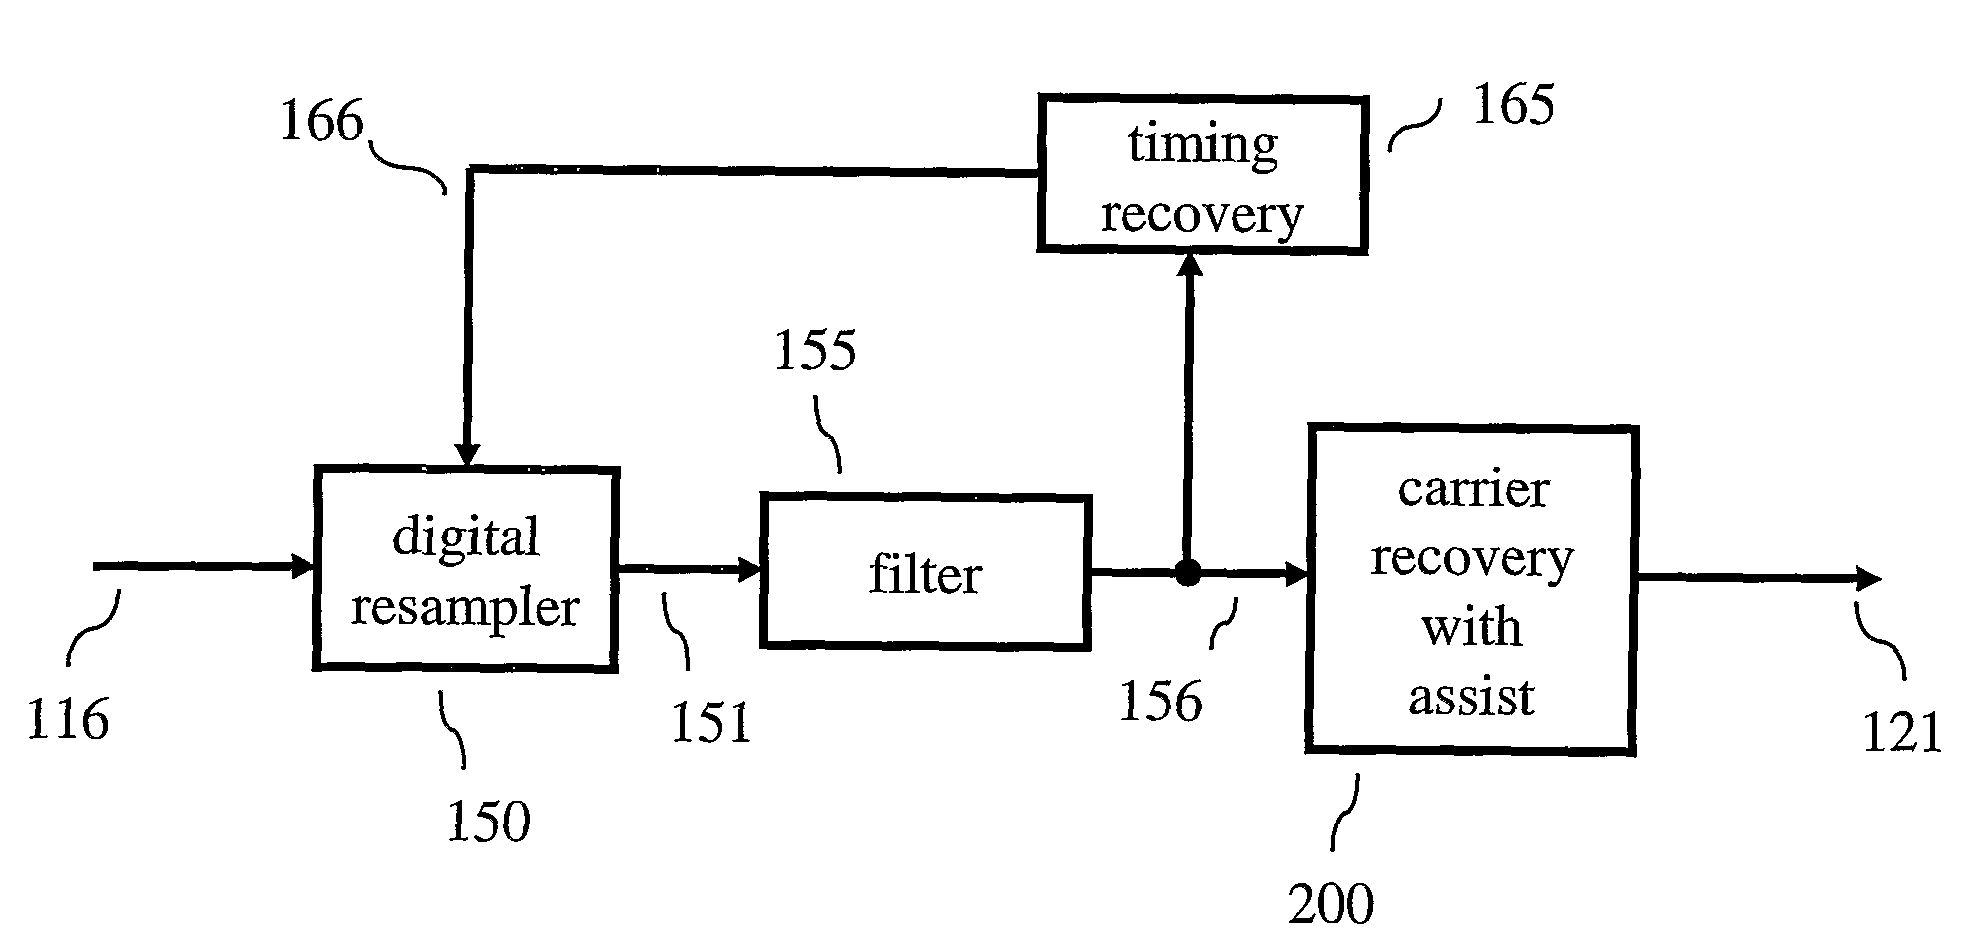 Method and Apparatus for Carrier Recovery Using Multiple Sources